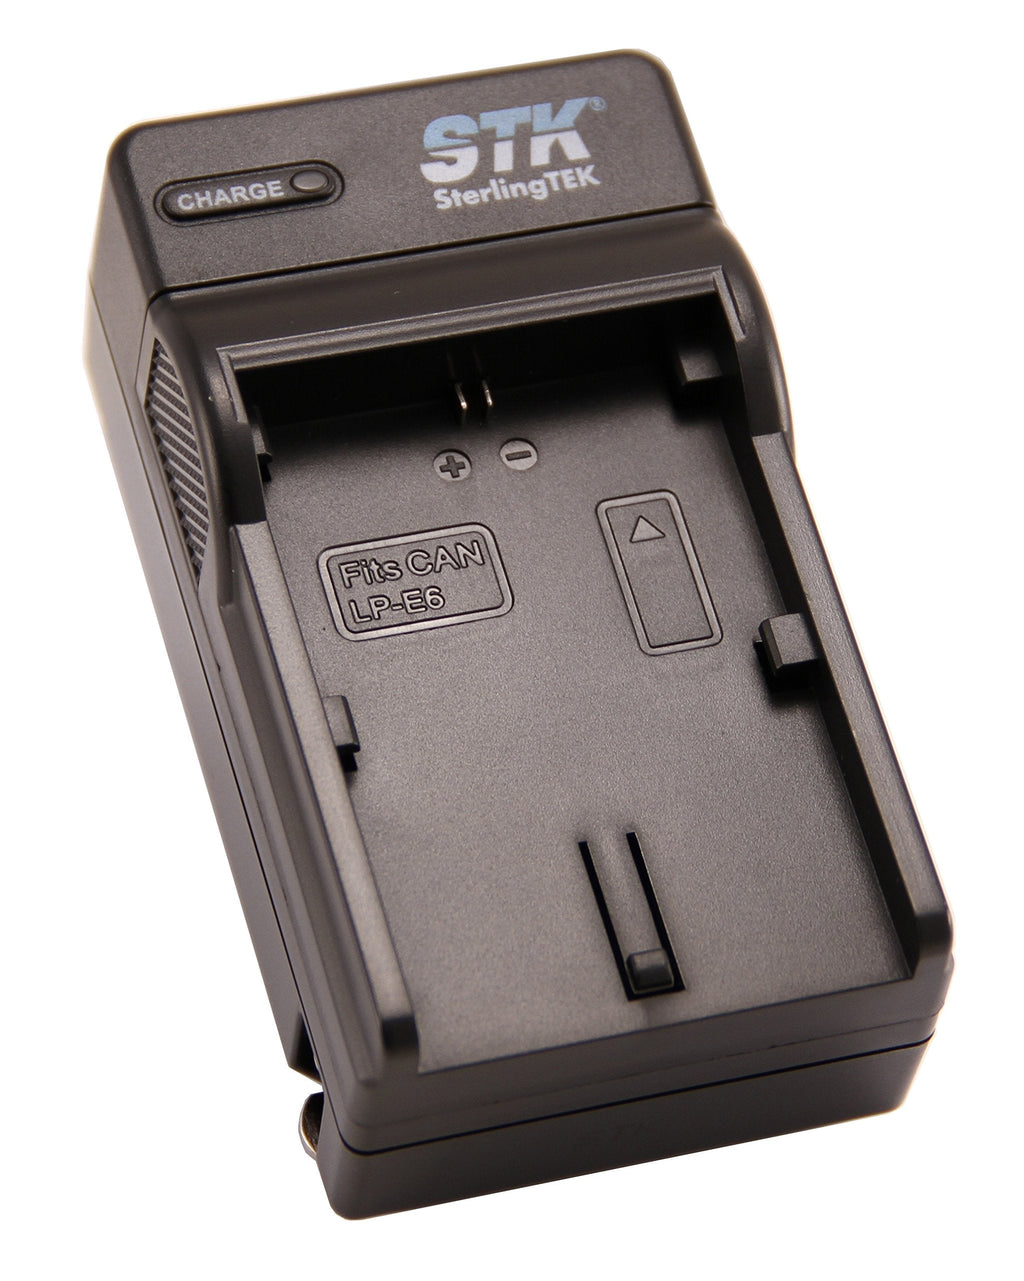 STK LP-E6 Charger for Canon EOS 5D Mark II III and IV, 70D, 5Ds, 6D, 5Ds, 80D, 7D and 7D Mark II, 60D Cameras, LP-E6 Battery, LC-E6 Charger